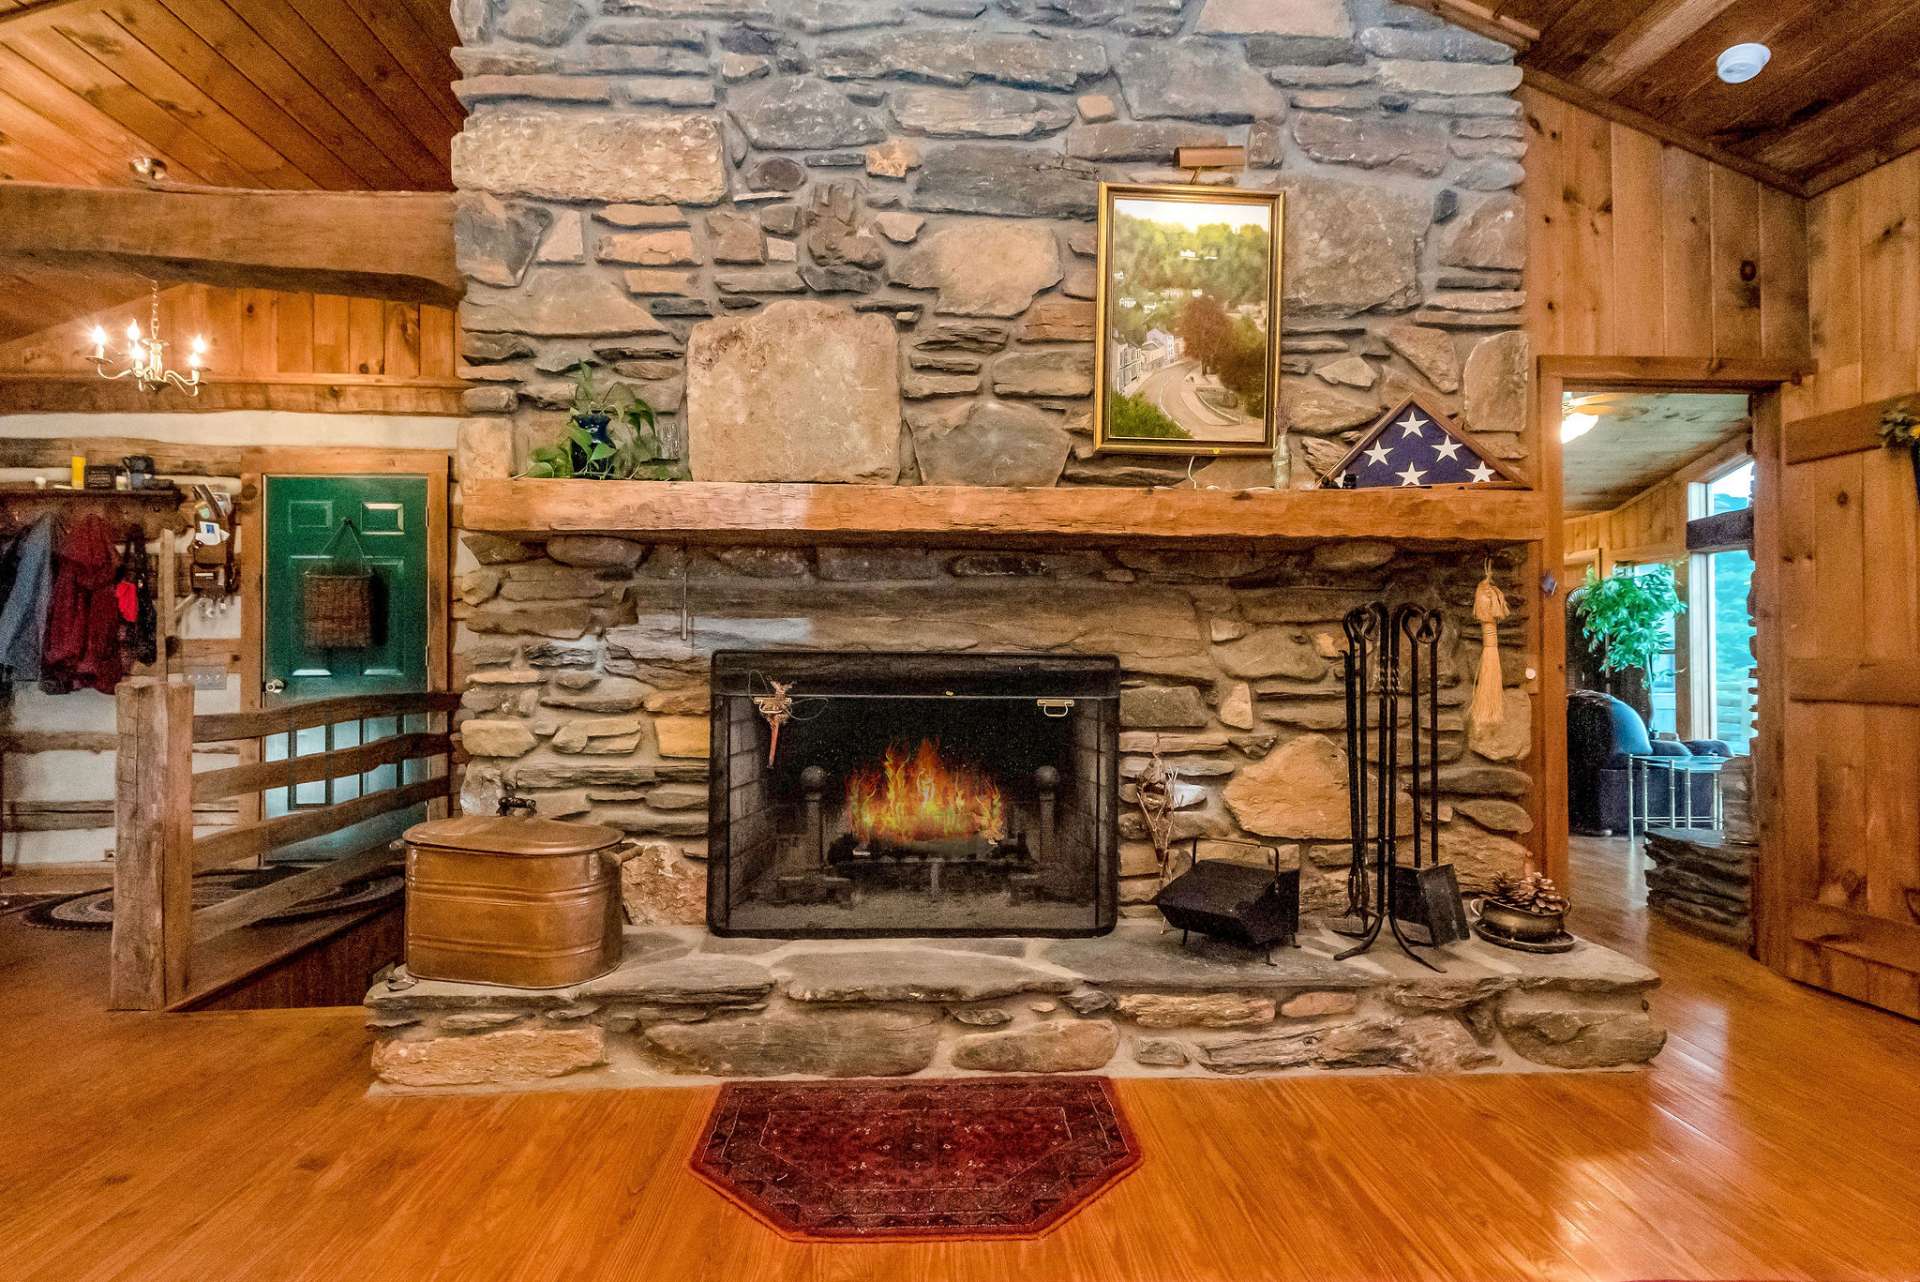 Spend your evenings sharing memories in front of one of the largest native stone fireplaces on the mountain.